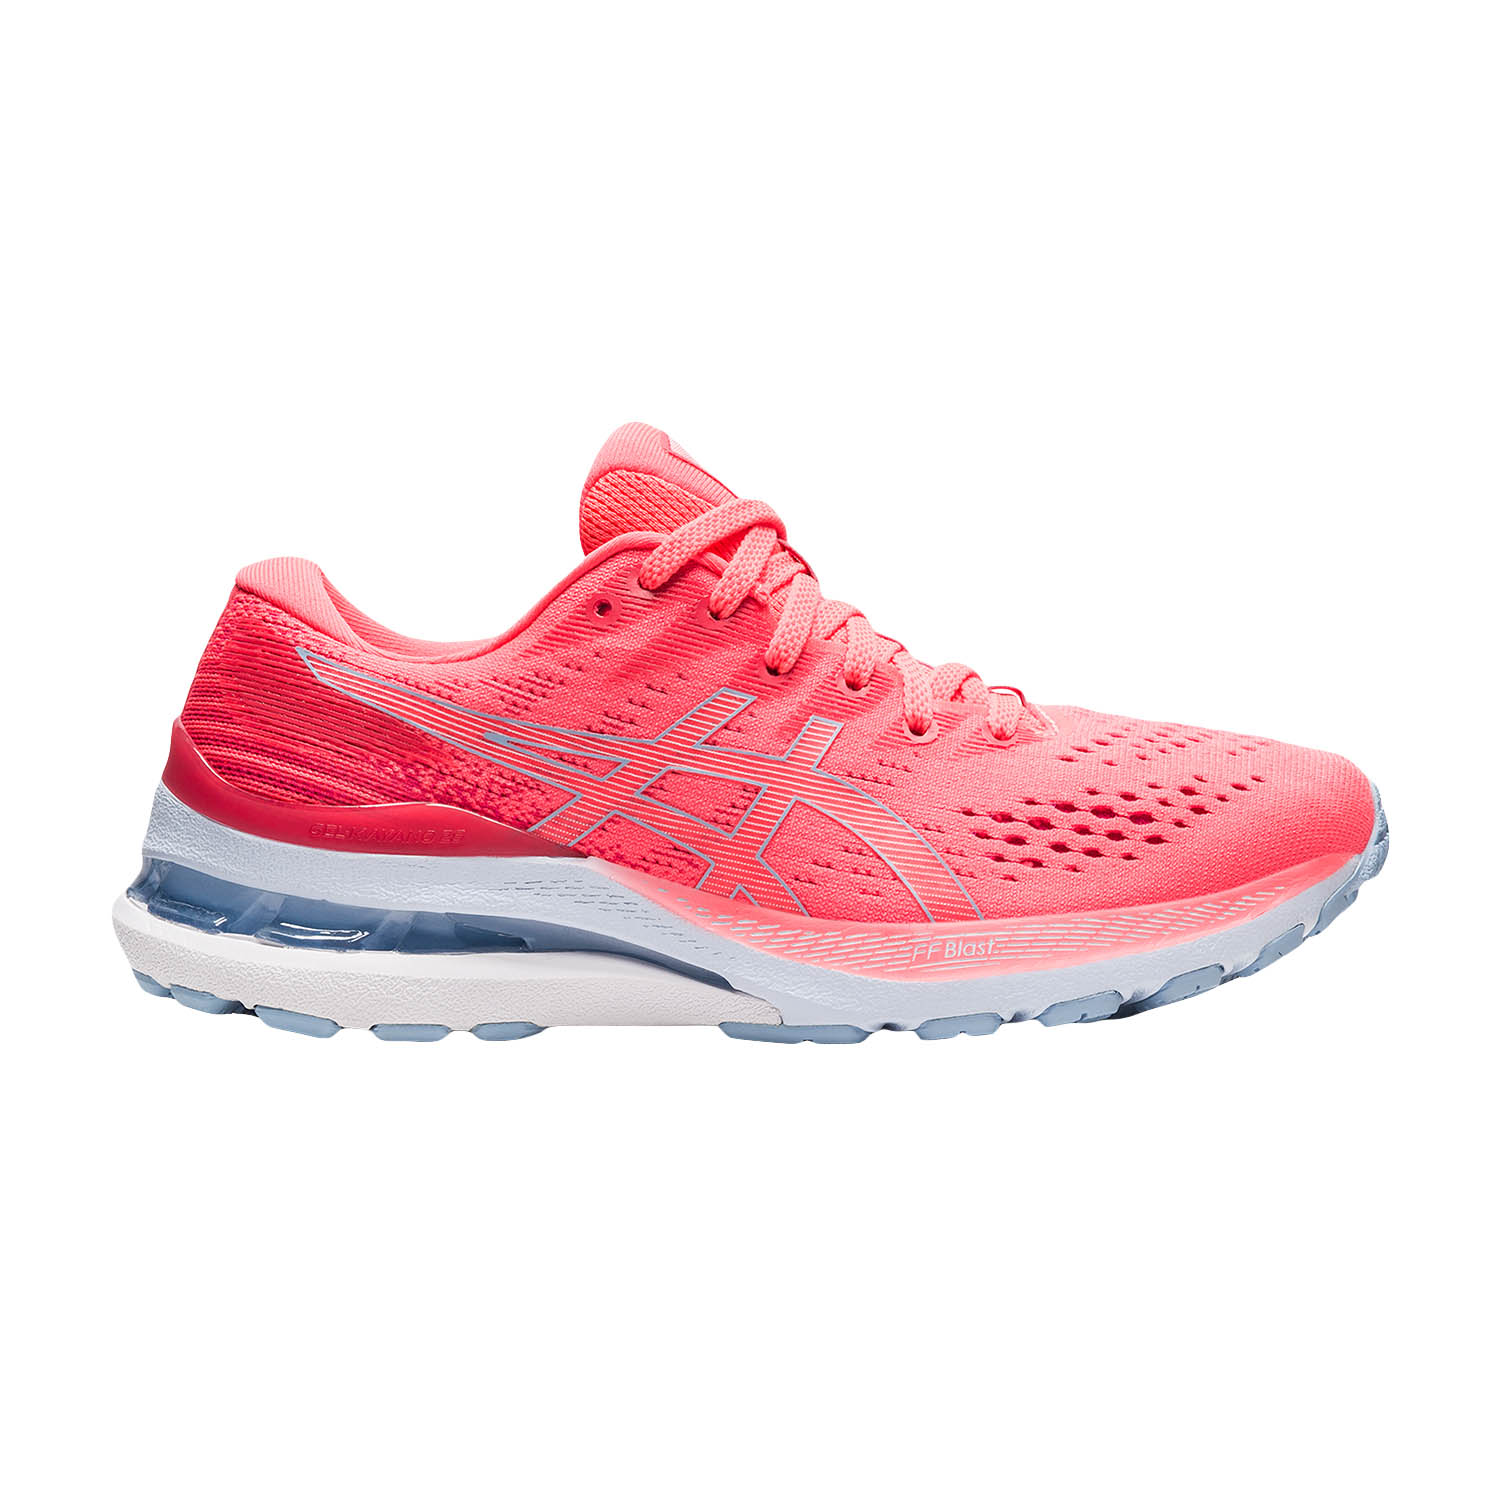 Melodic hit Frank Worthley Asics Gel Kayano 28 Women's Running Shoes - Blazing Coral/Mist